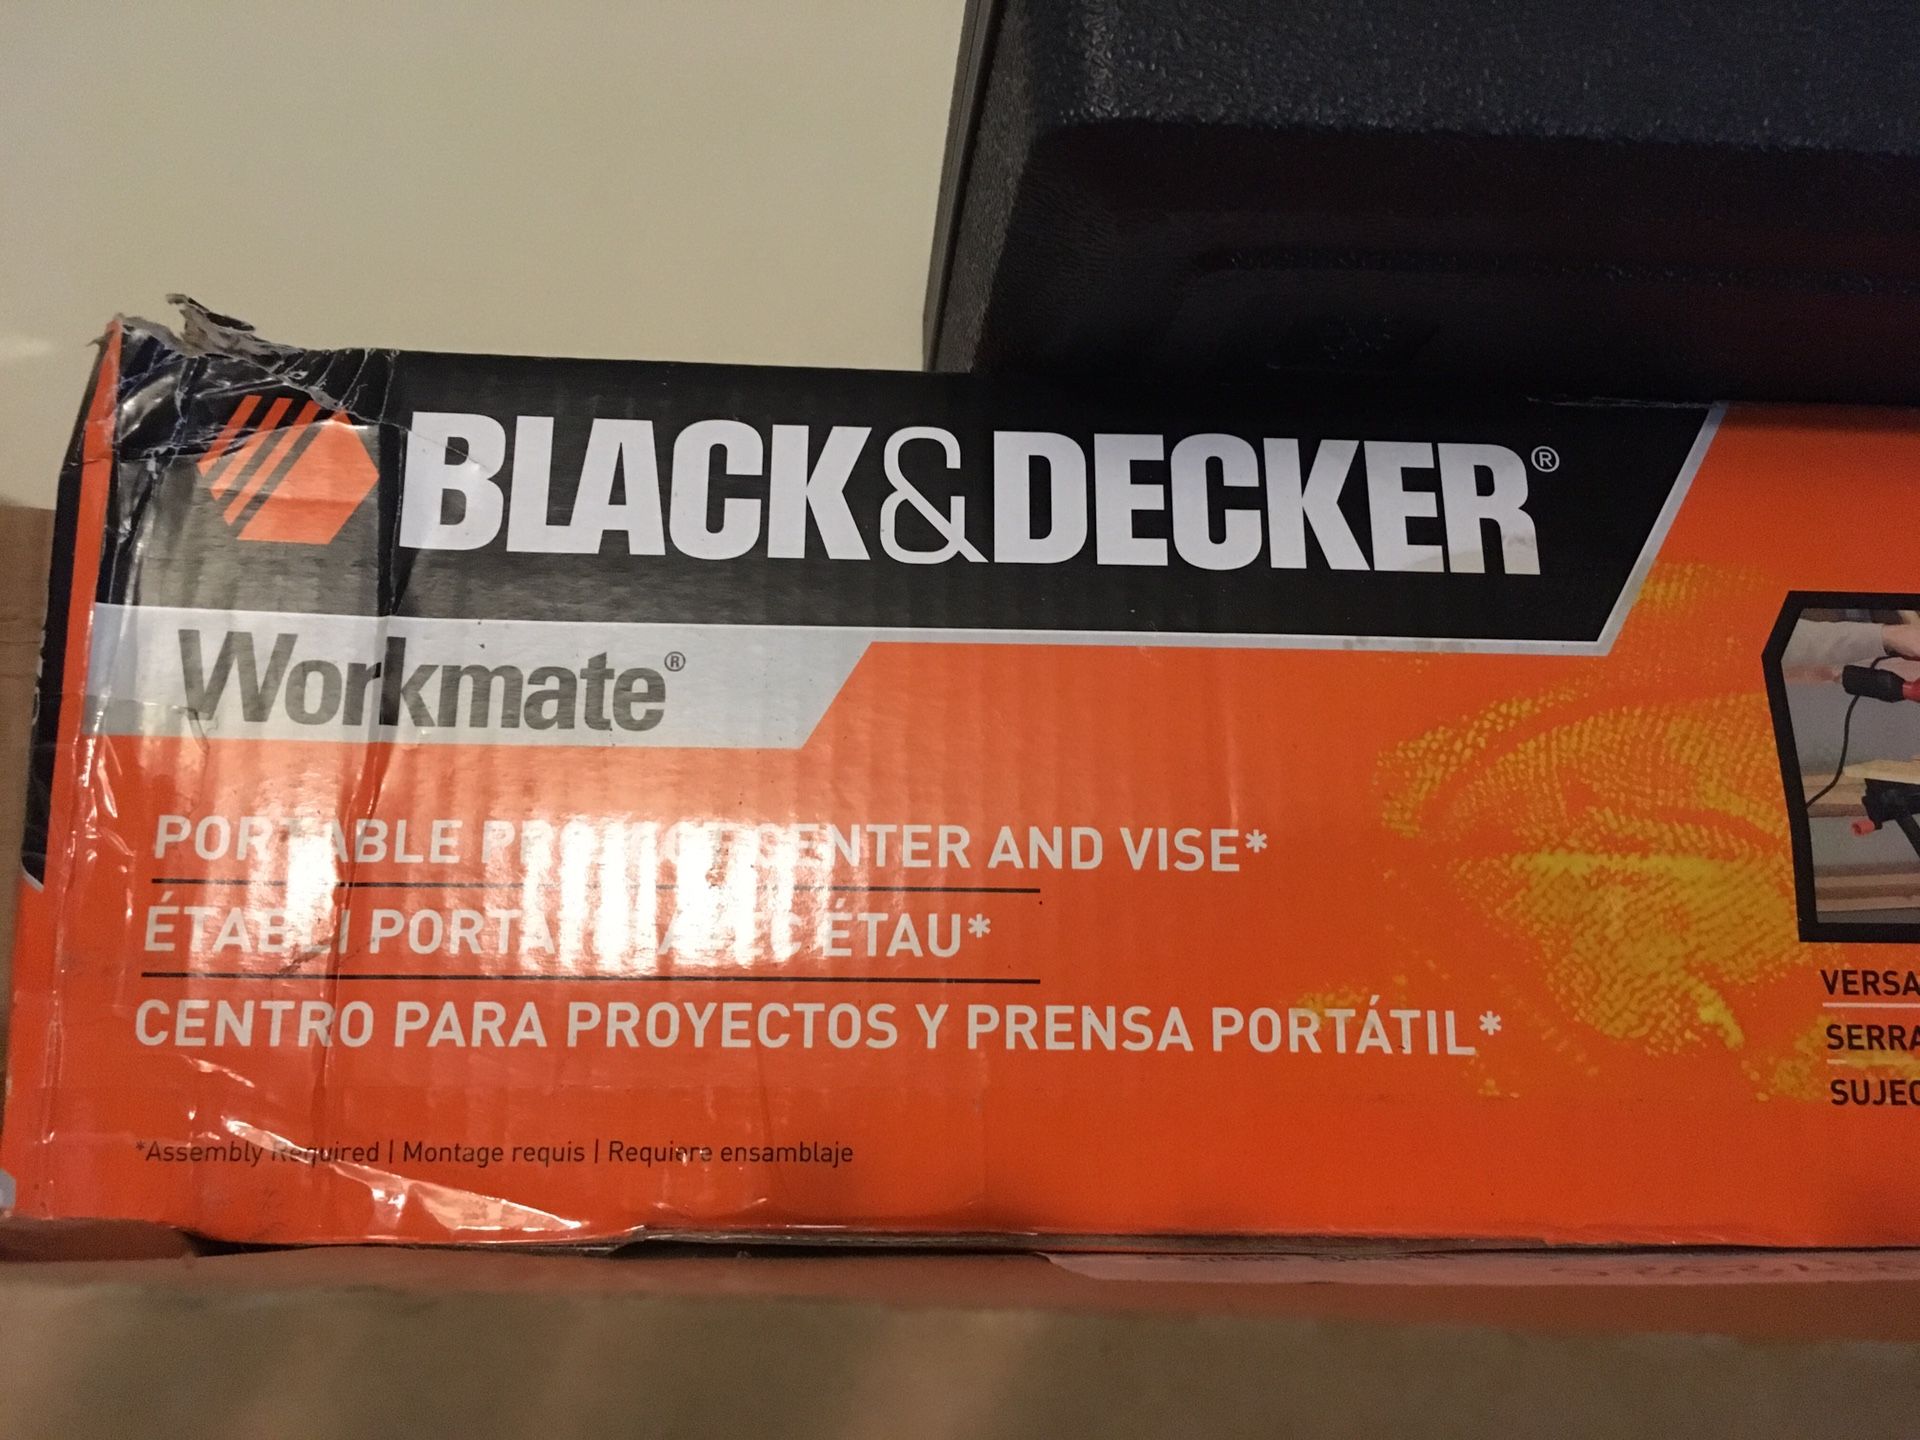 Black and decker workmate work table